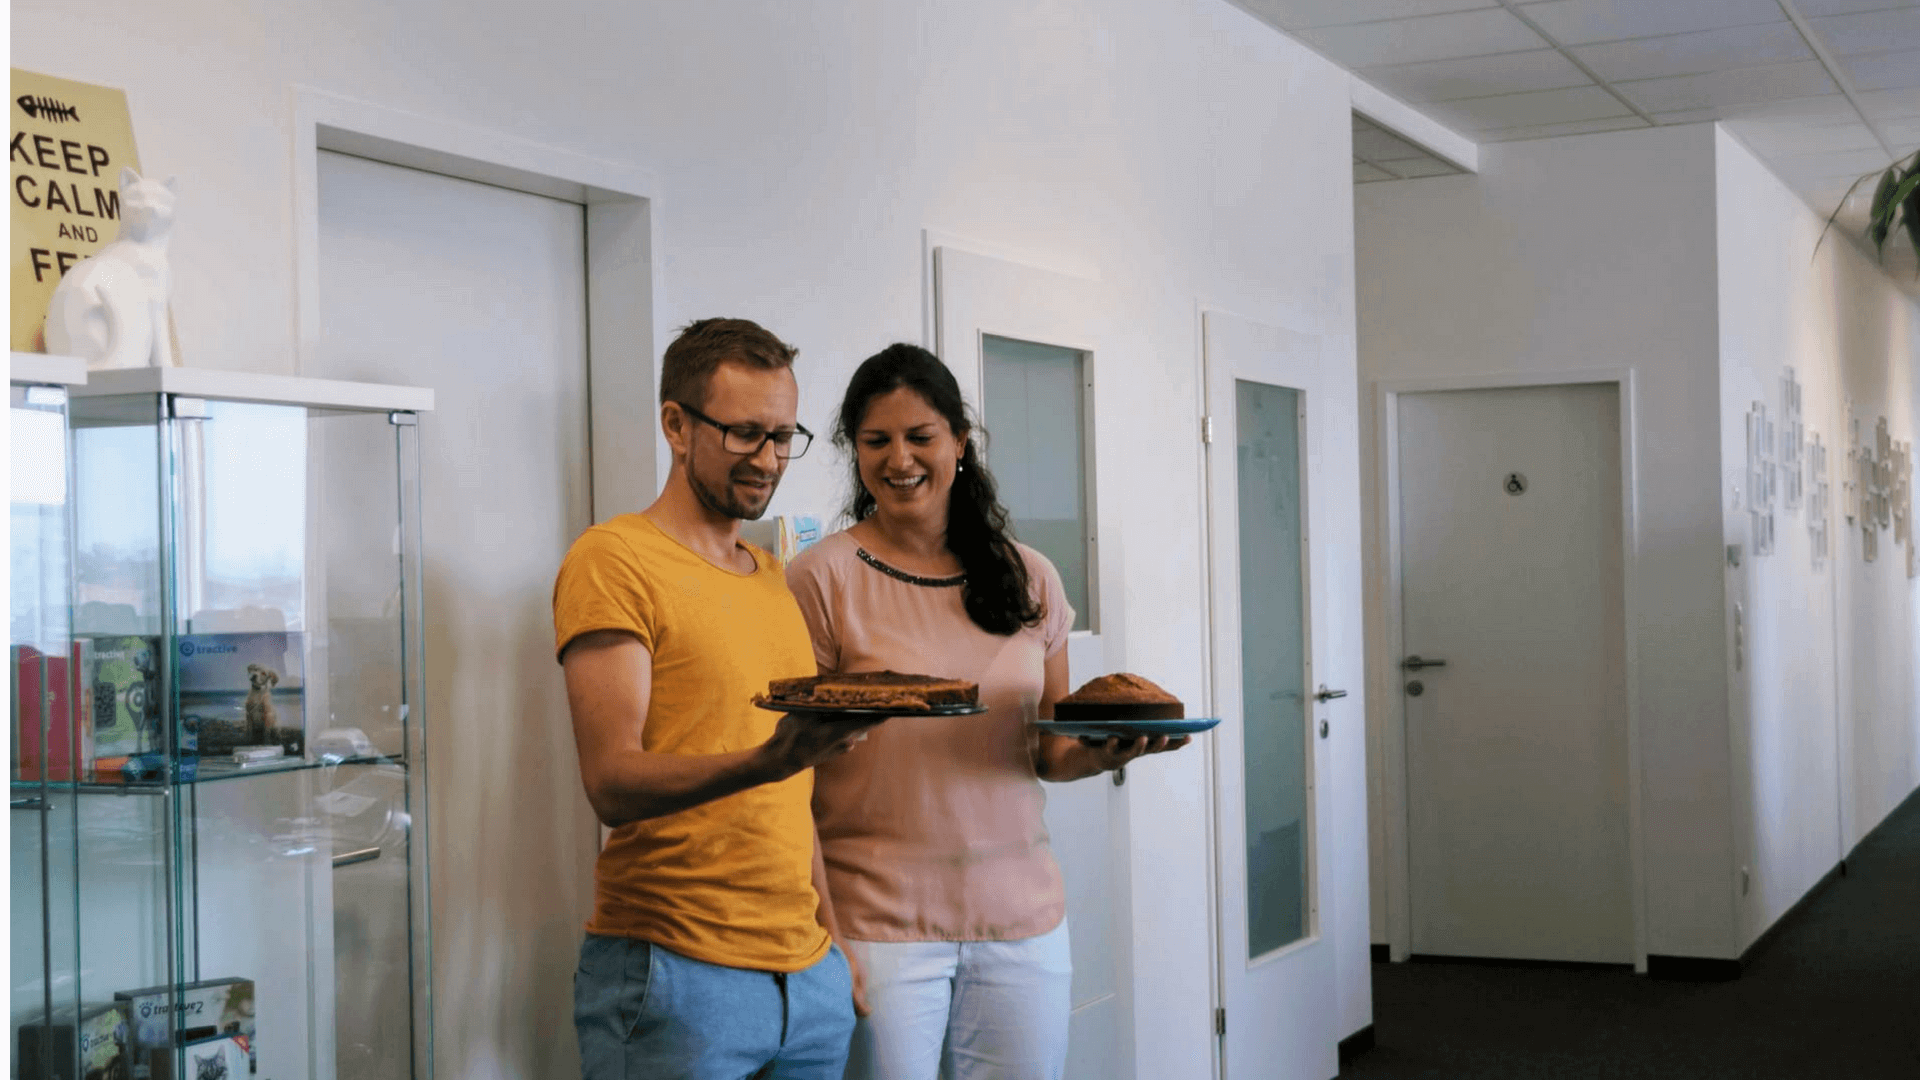 Babsi und Dominik live the company culture when they announce the cake